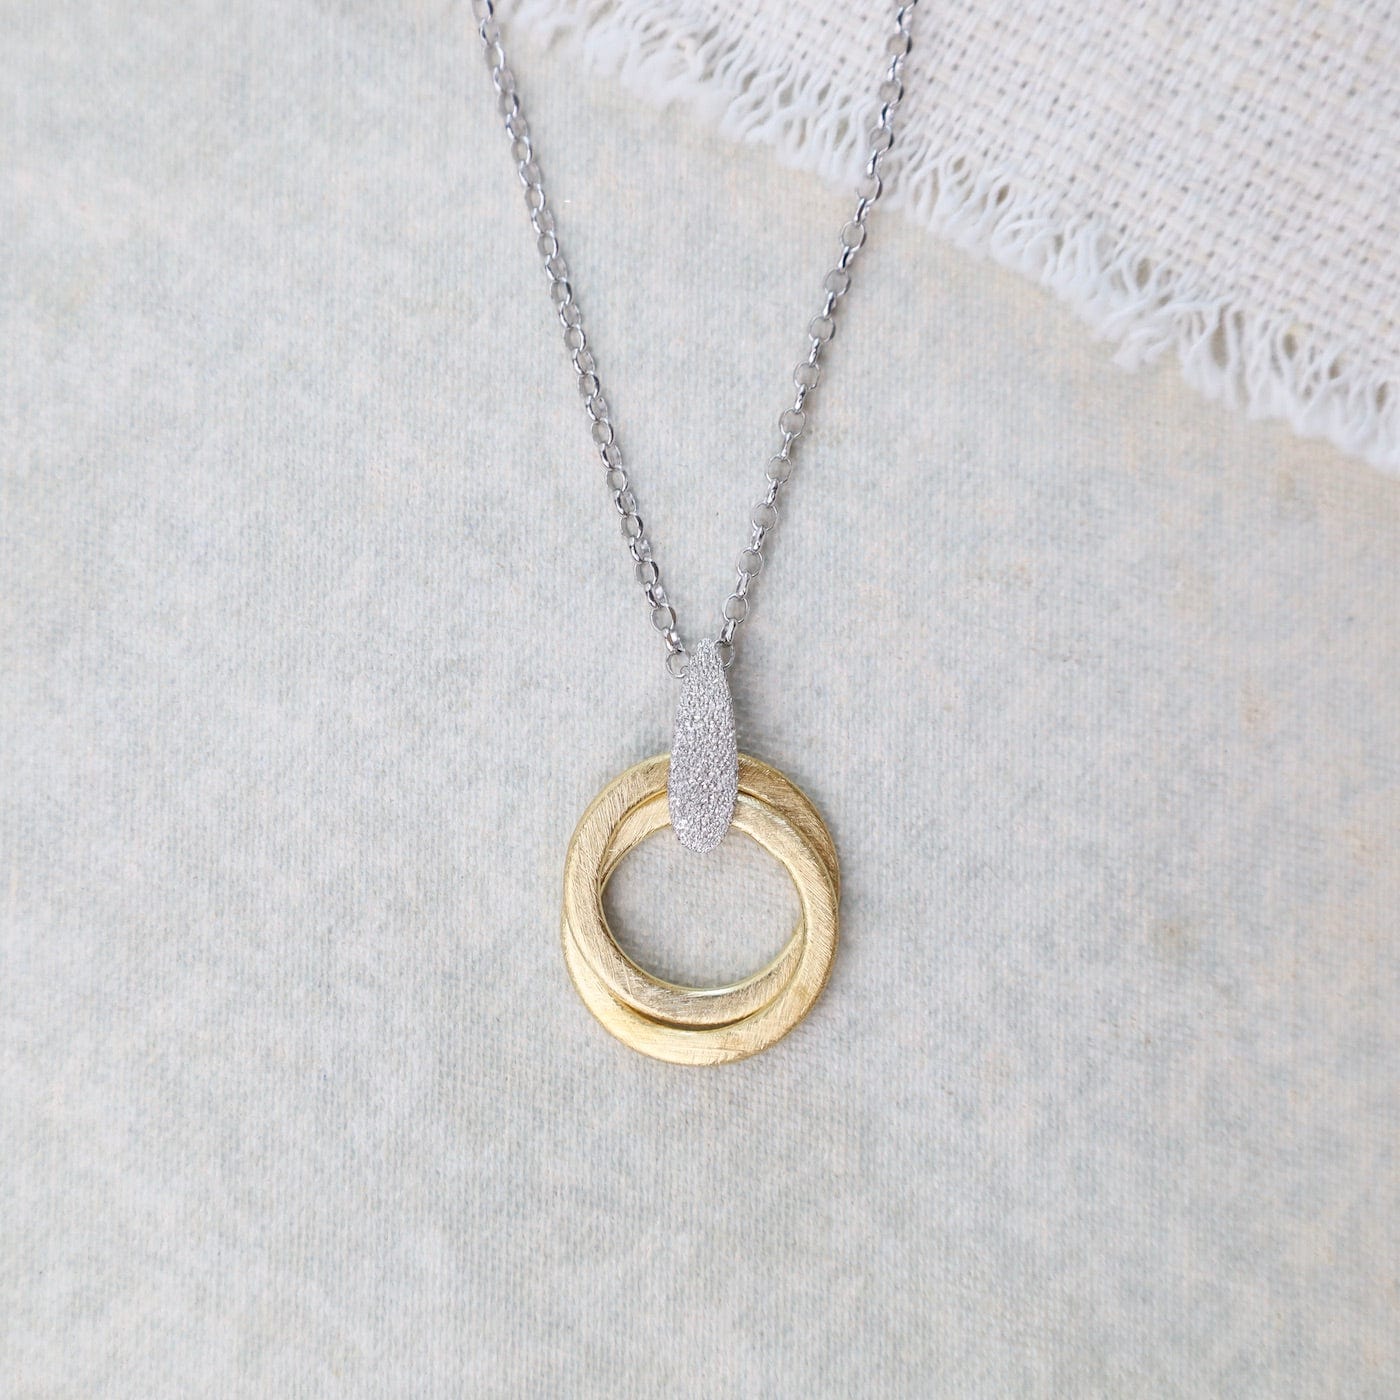 NKL-GPL Sterling Silver & Yellow Gold Plated Rory Necklace